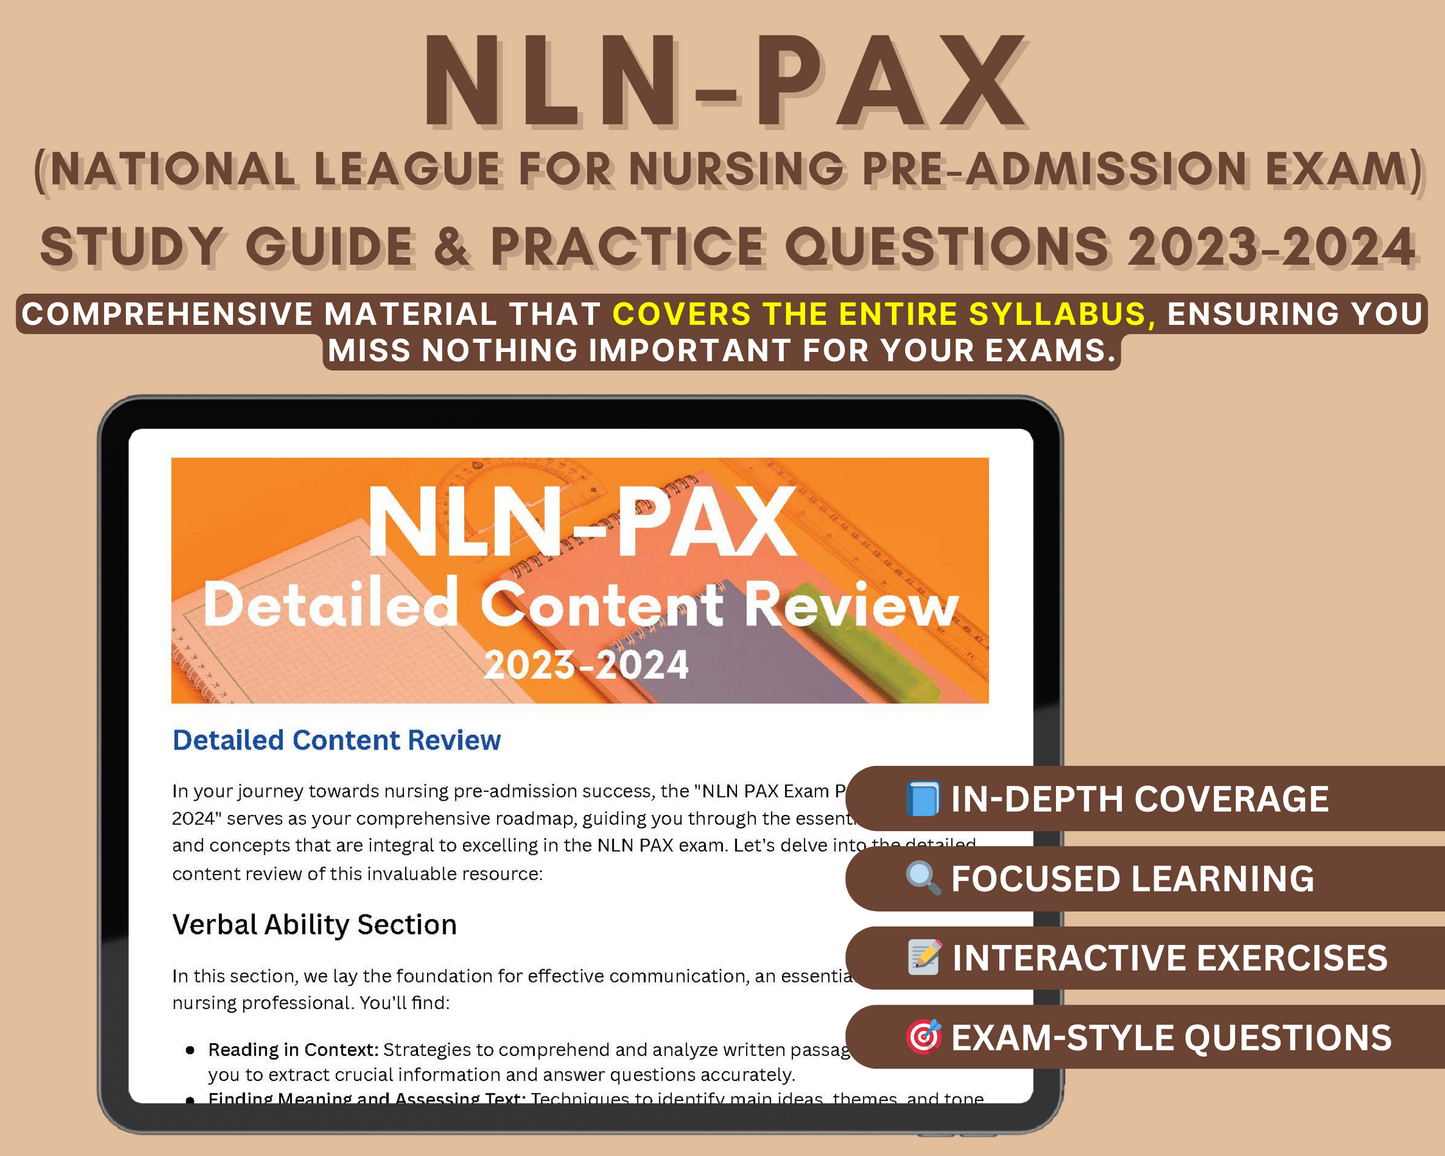 NLN PAX Study Guide 2023-2024: Practice Questions, Detailed Answers & Strategies for Nursing School Entrance Exam and Allied Health Excellence